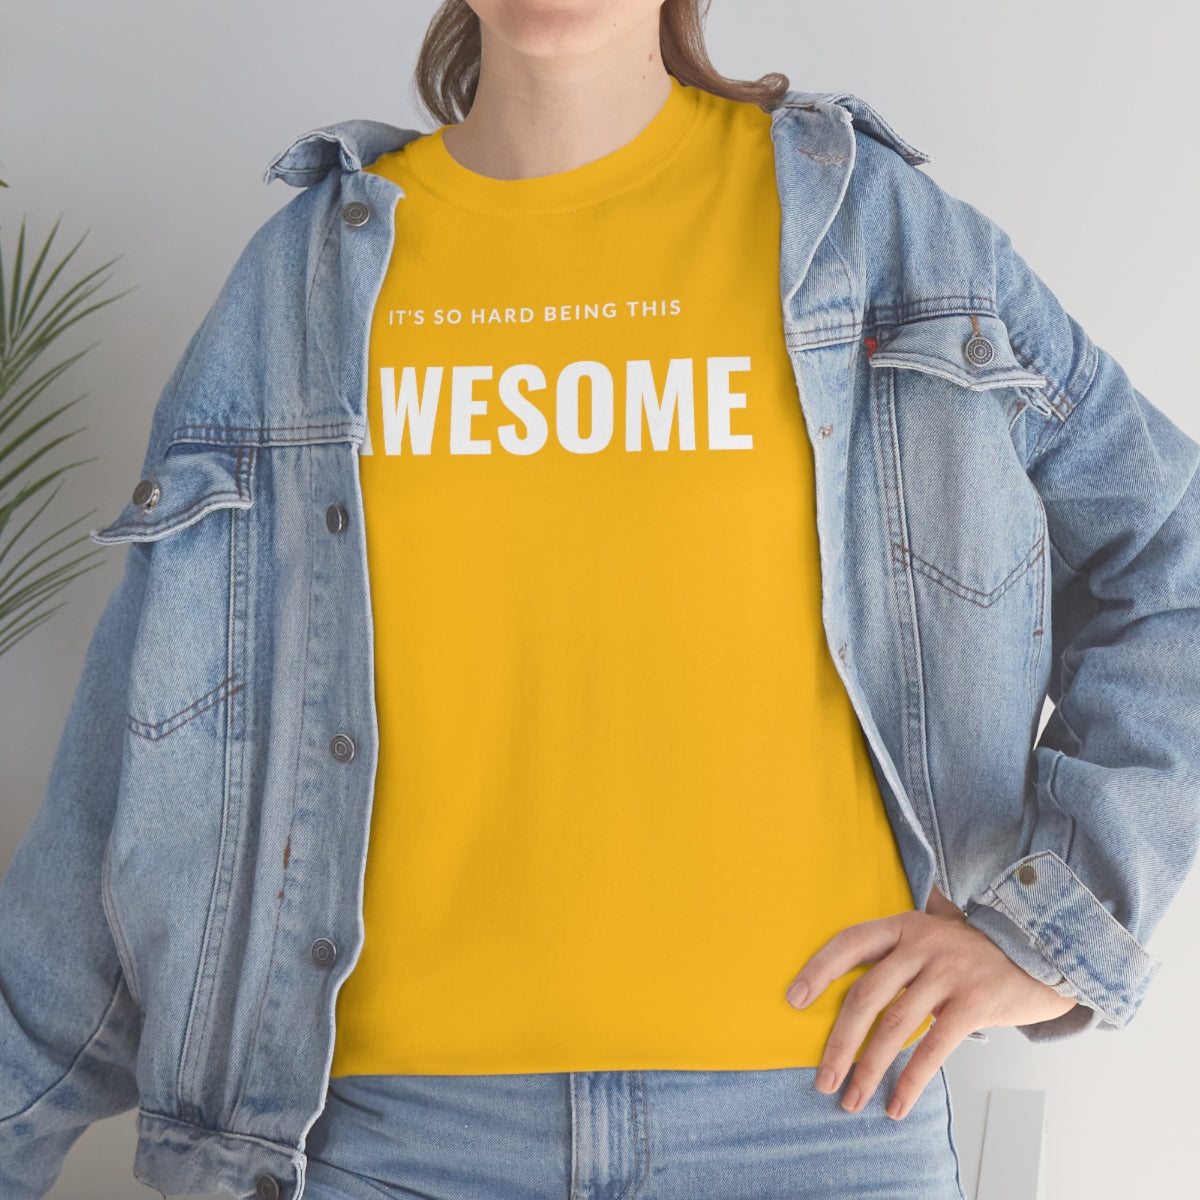 It's hard being this AWESOME Tee